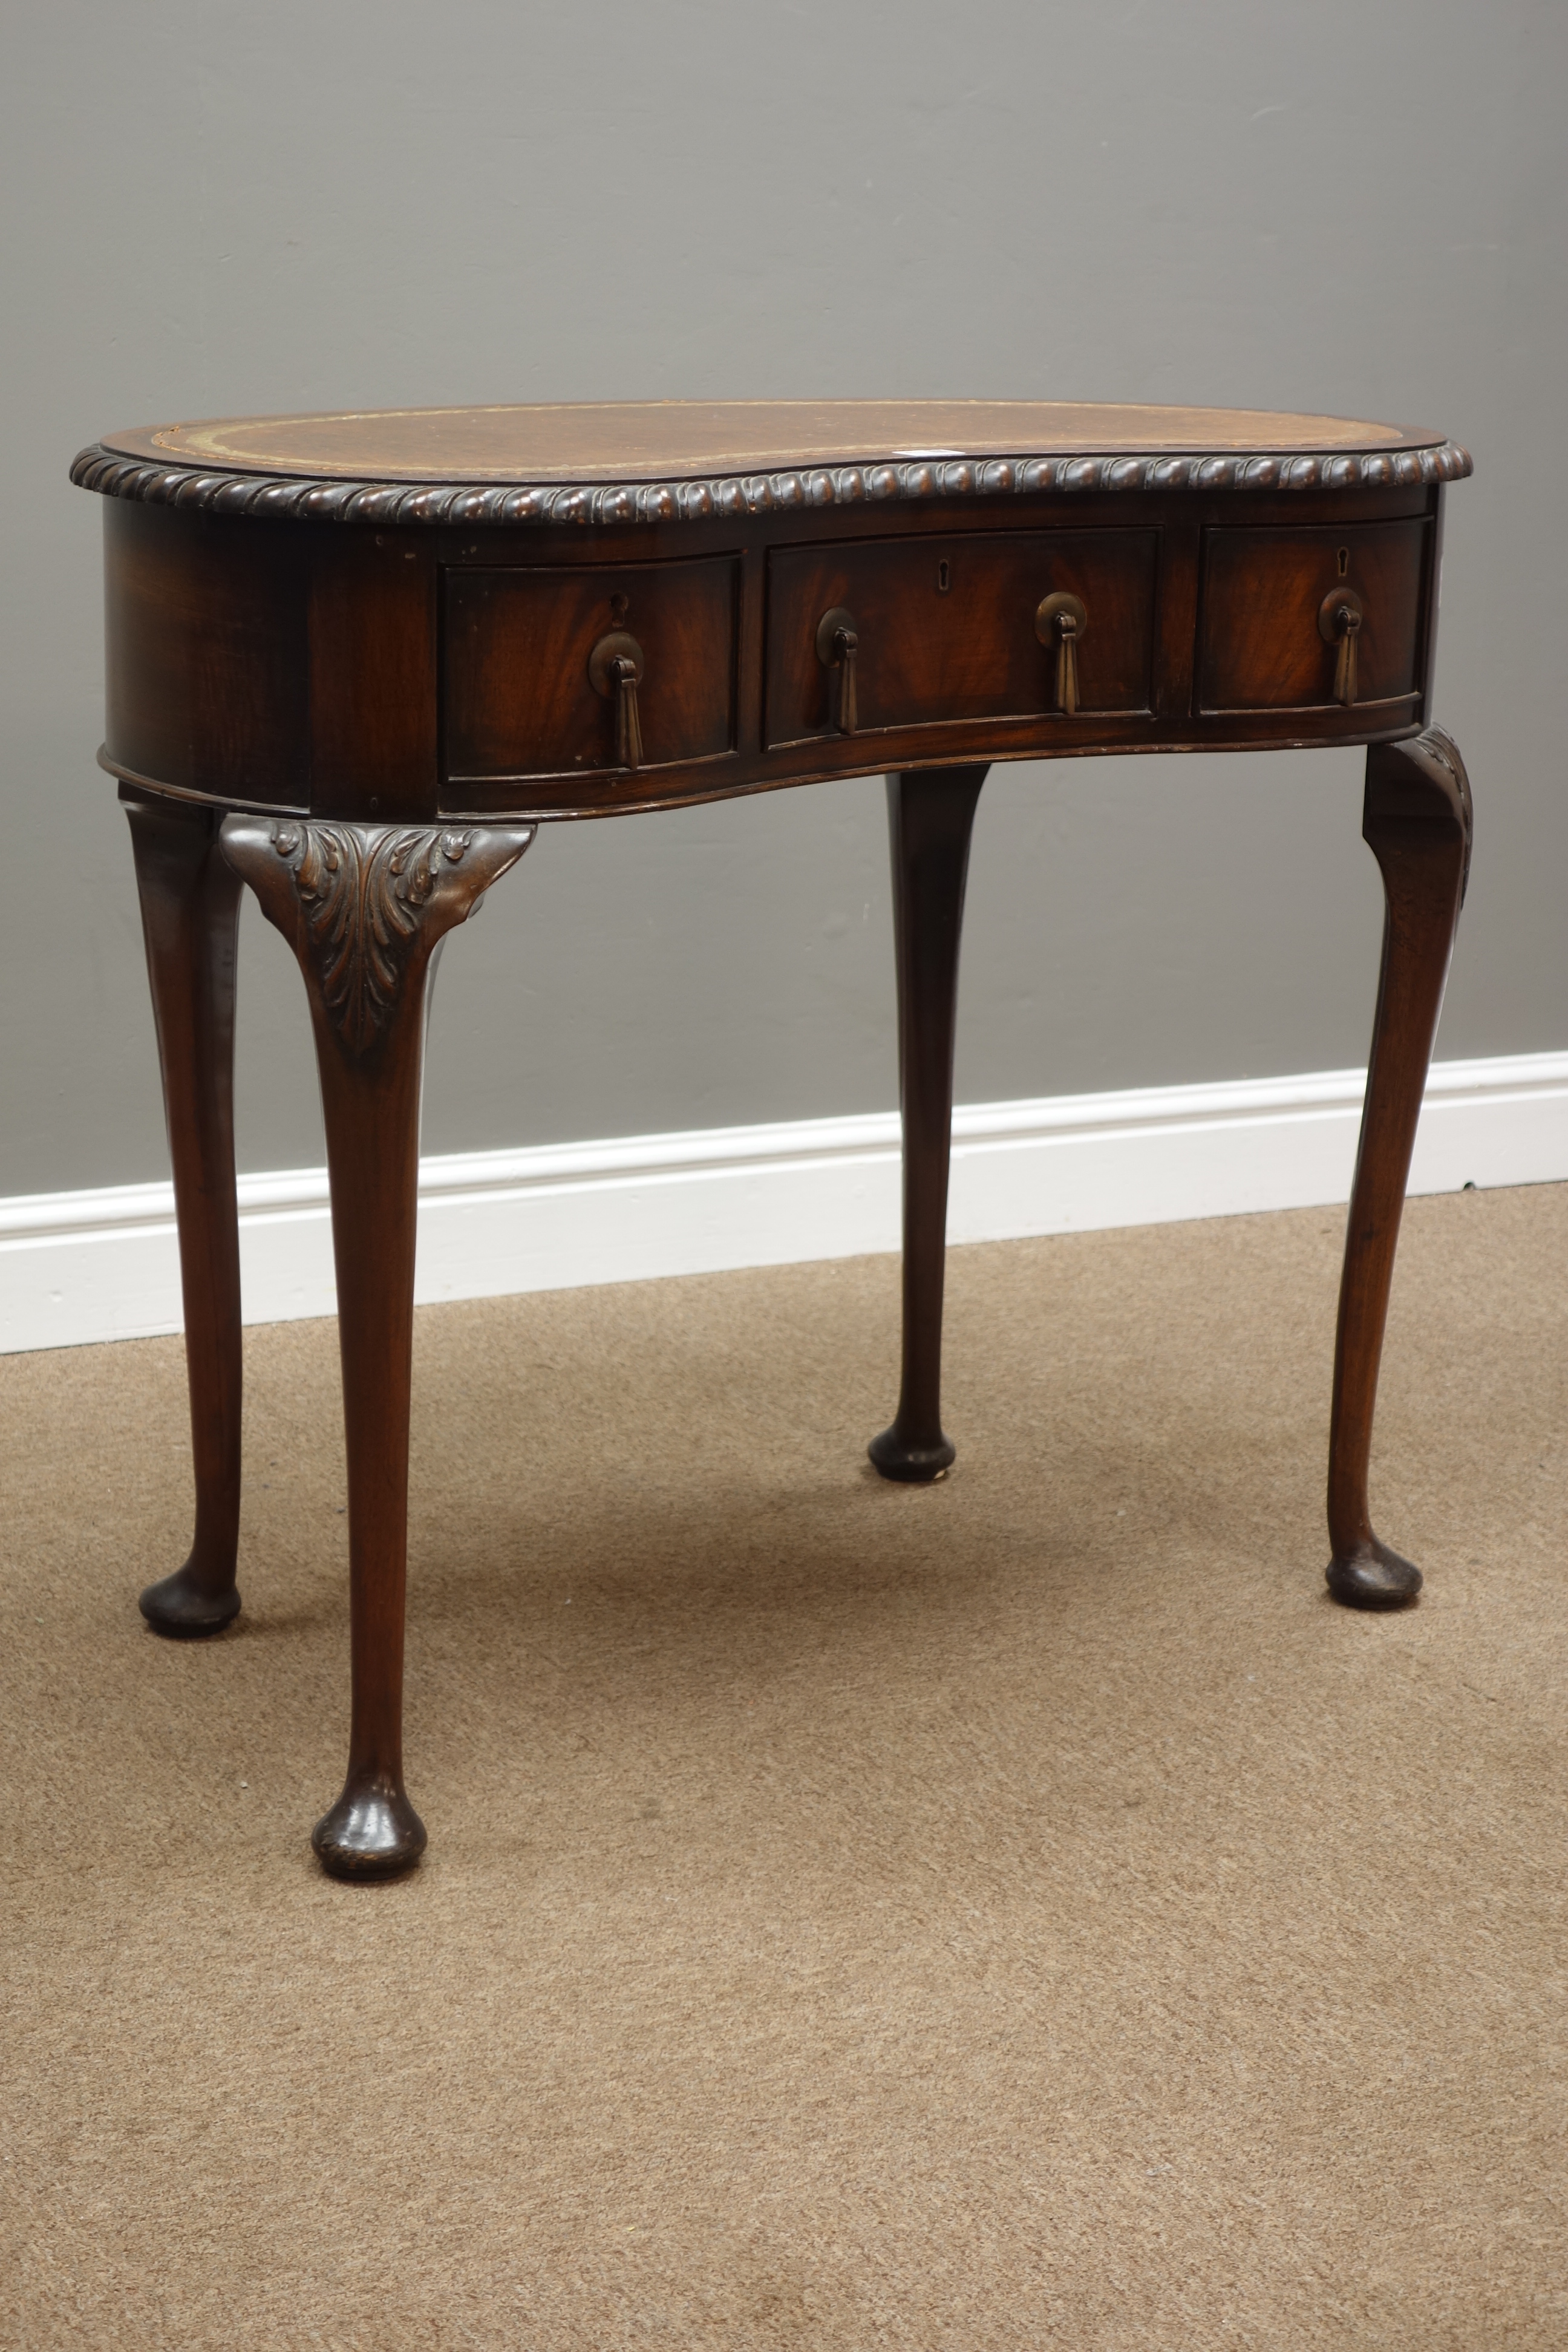 Early 20th century mahogany writing desk, kidney shaped top with gadroon moulding, - Image 3 of 5